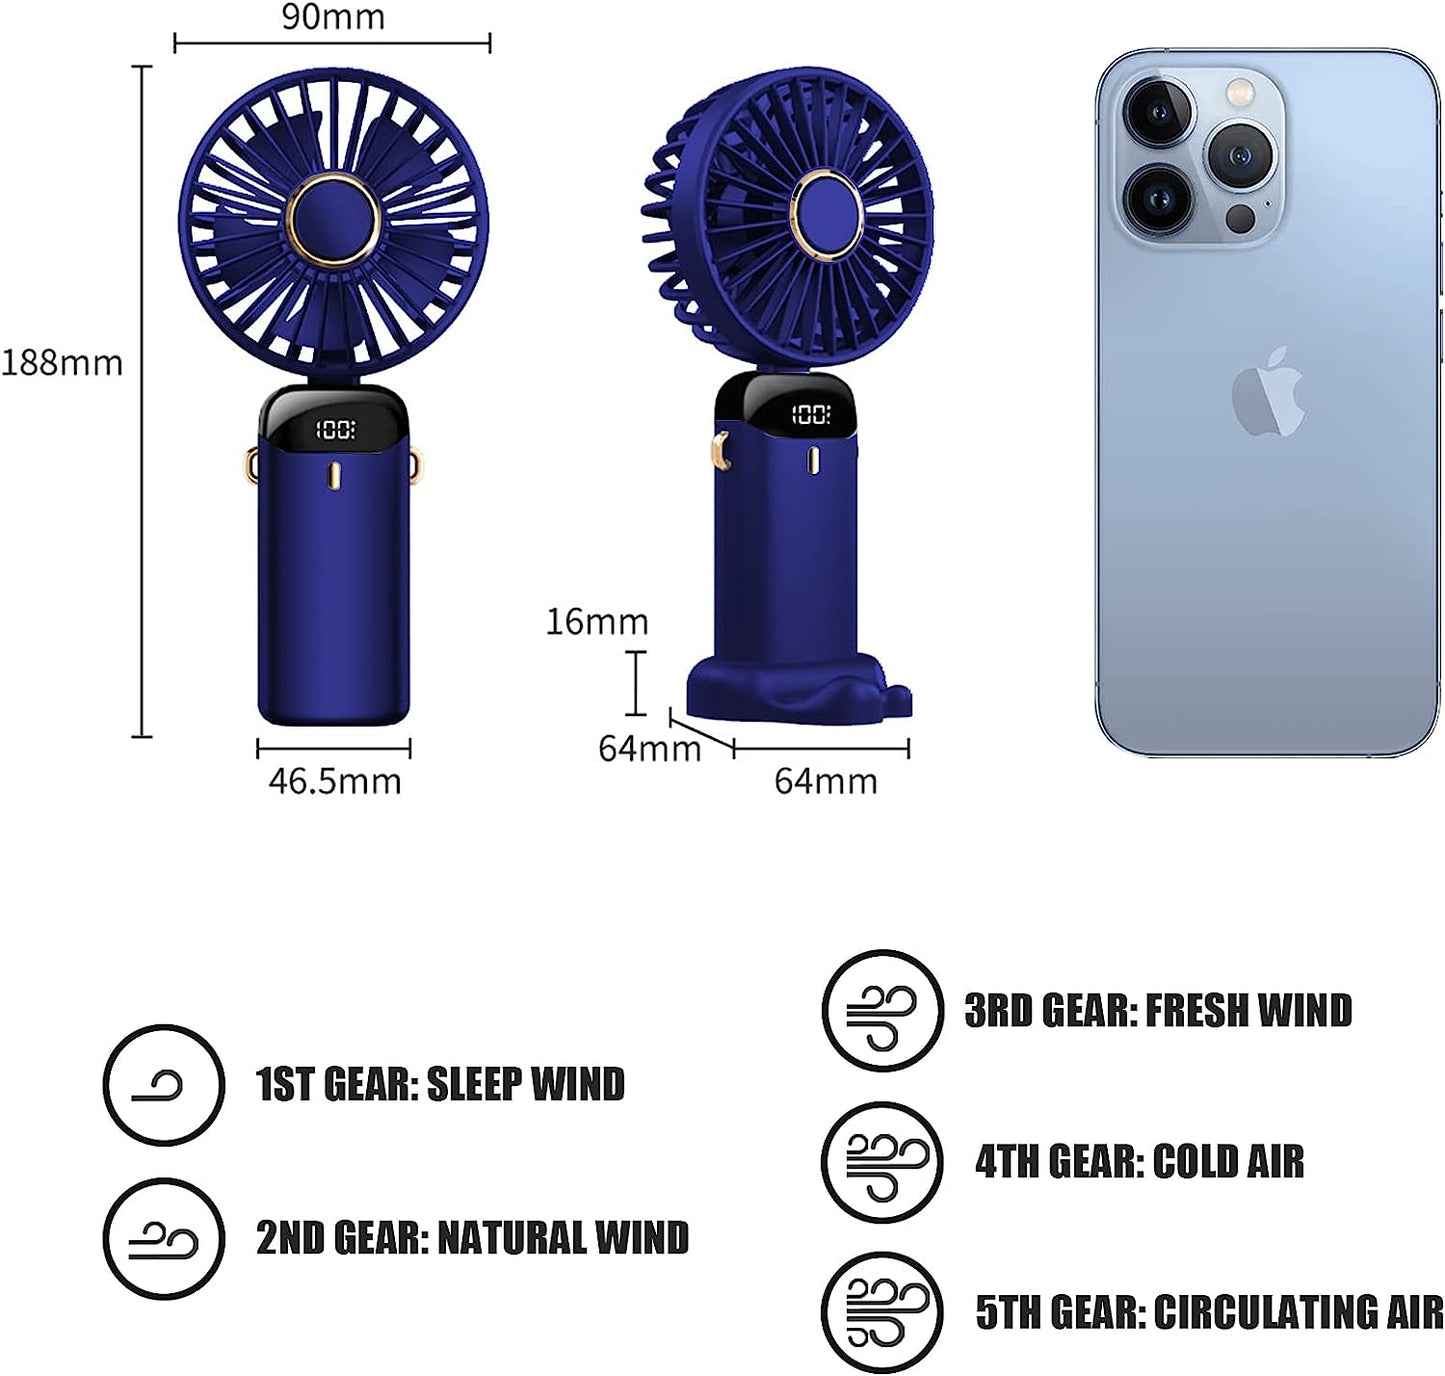 Hand Held Fan,Portable Handheld USB Rechargeable Fans with 5 Speeds,Battery Operated Mini Fan Foldable Desk Desktop Fans with LED Display for Home Office Bedroom Outdoor Travel (Darkblue)